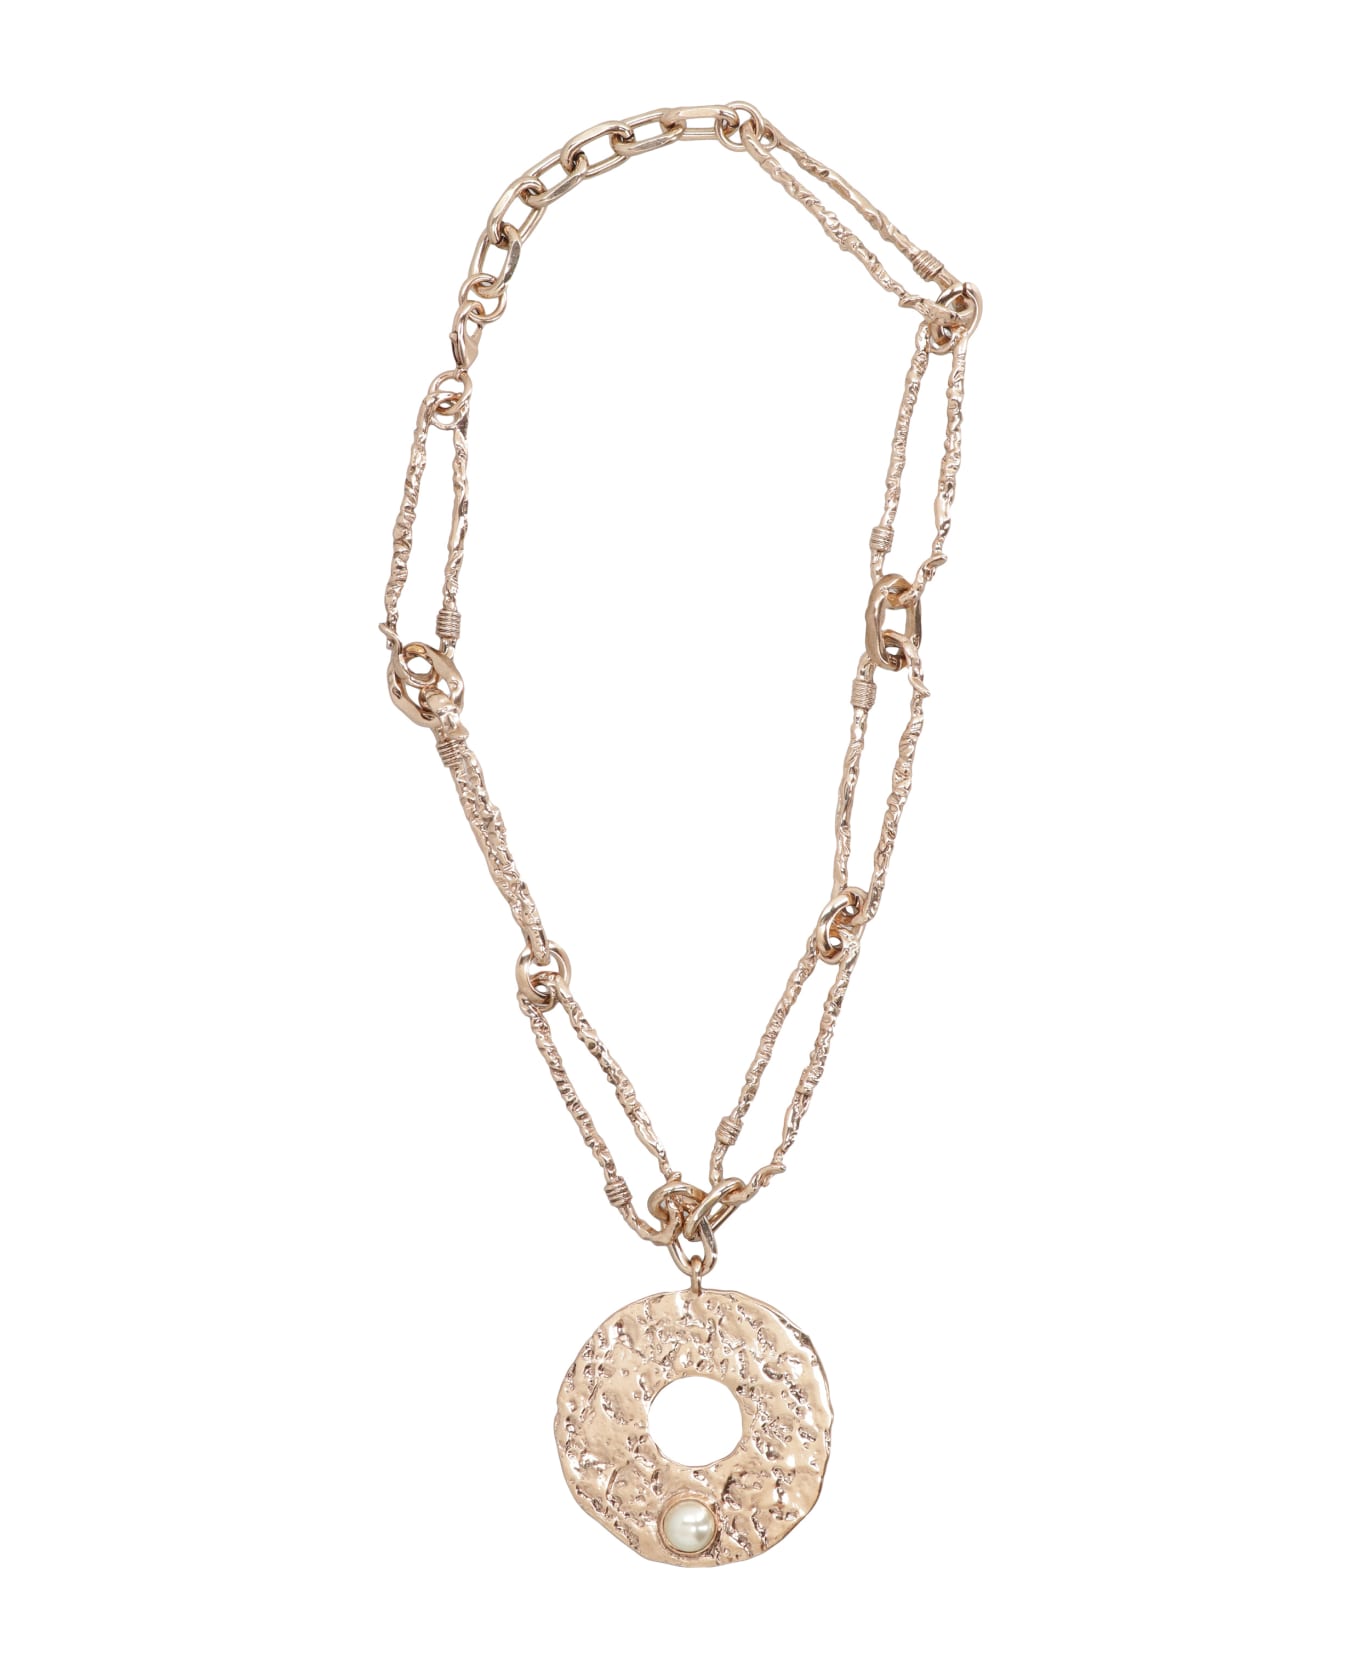 Weekend Max Mara Tigre Chain Necklace - Gold